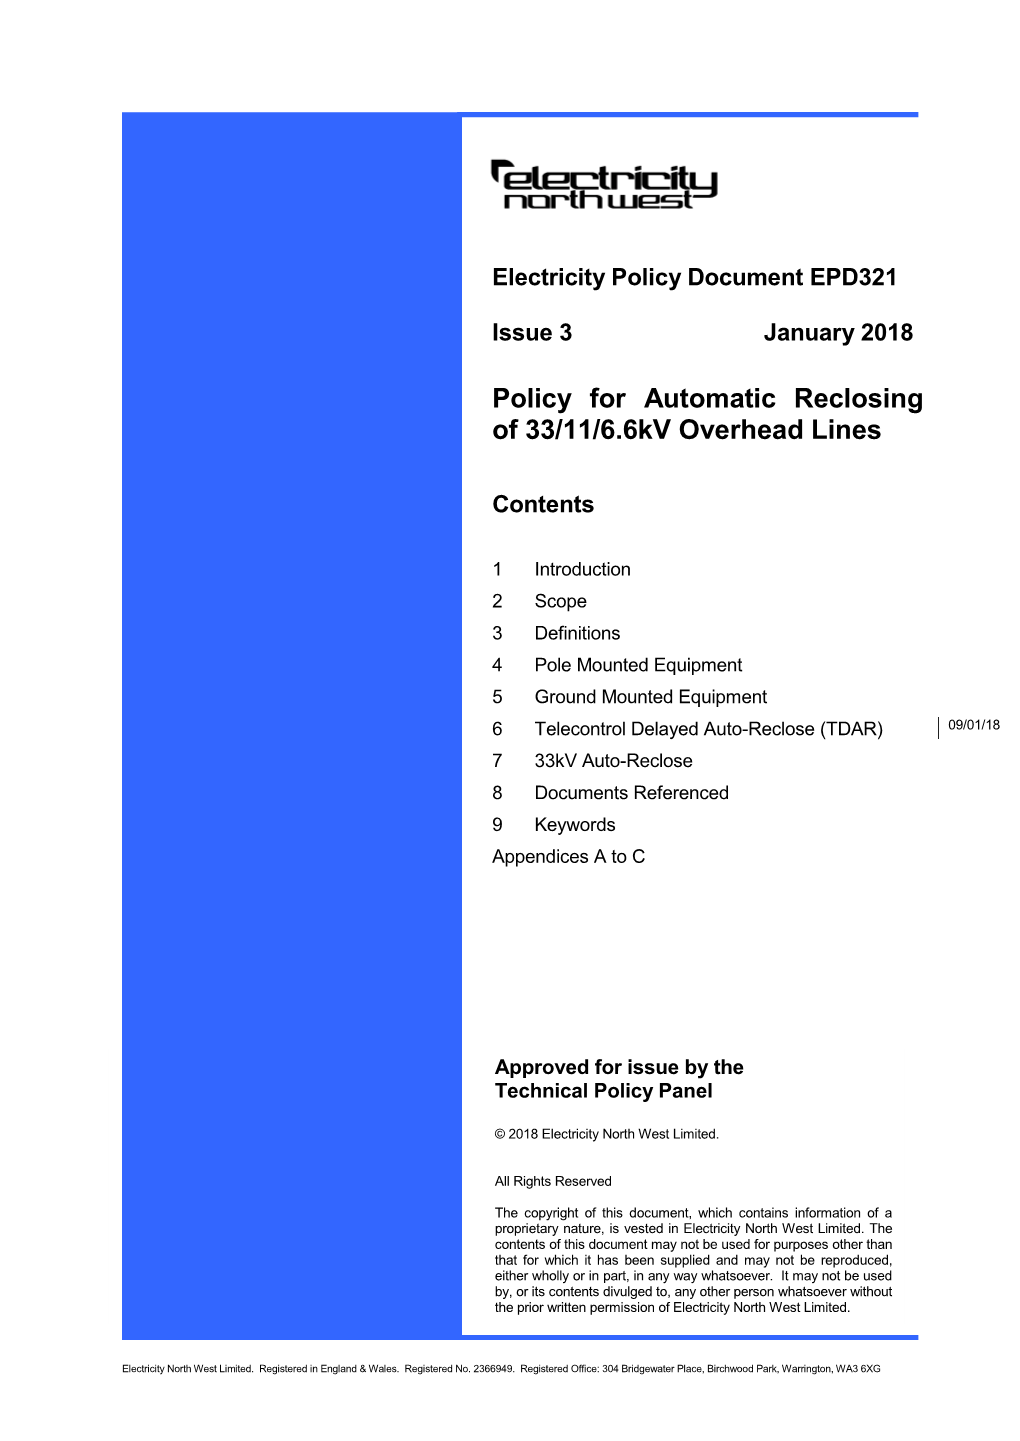 Policy for Automatic Reclosing of 33/11/6.6Kv Overhead Lines